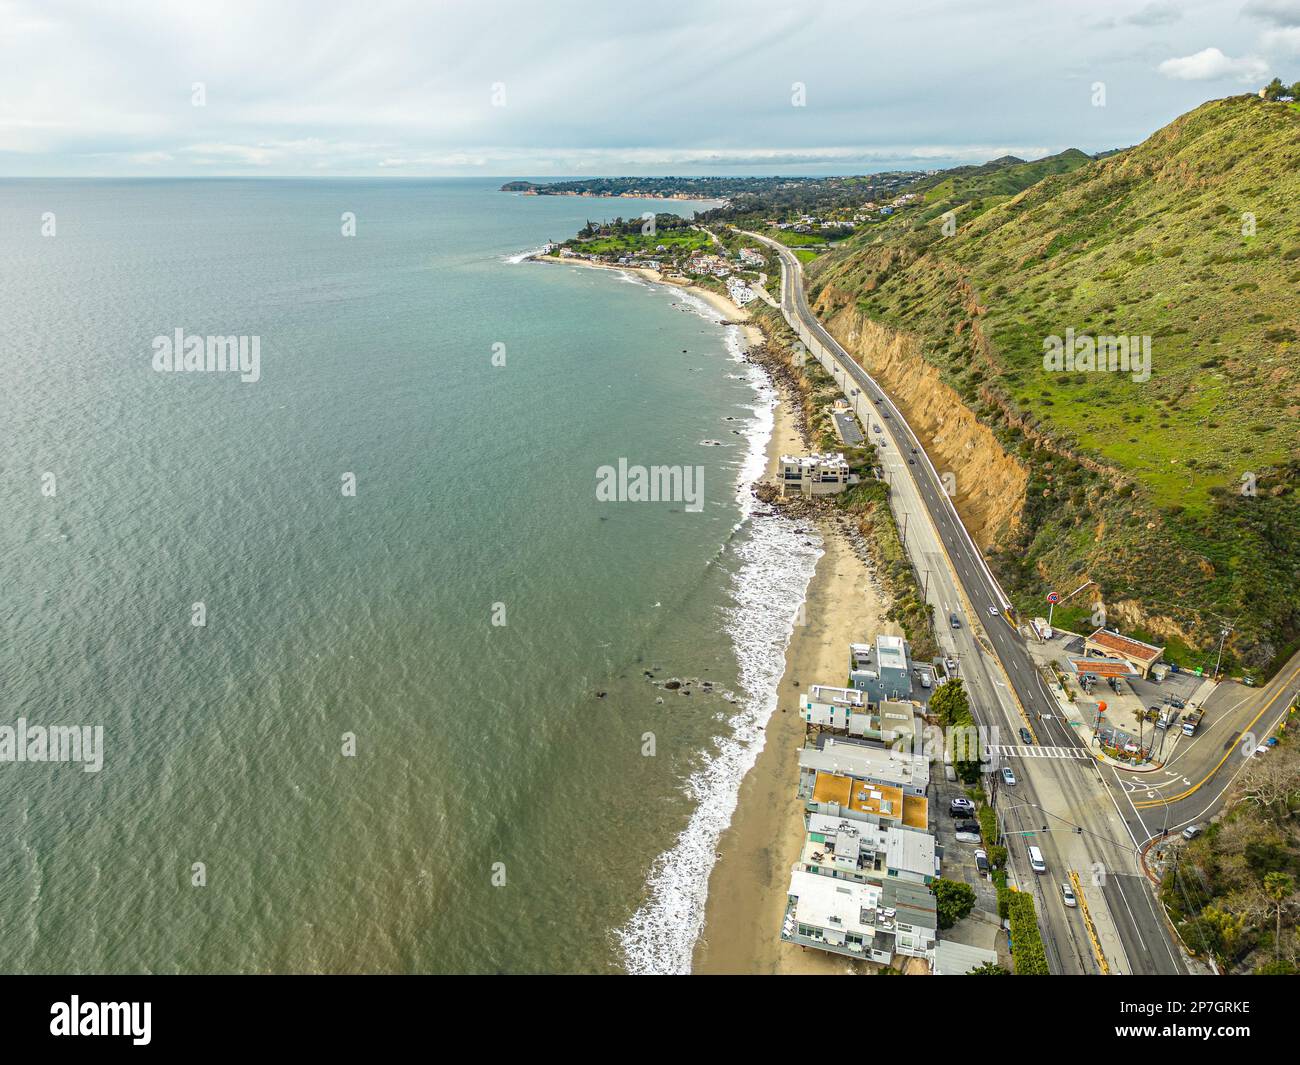 Highway Route 1 California. Aerial Panorama of the coastline and road. Green hills and beach on side Stock Photo